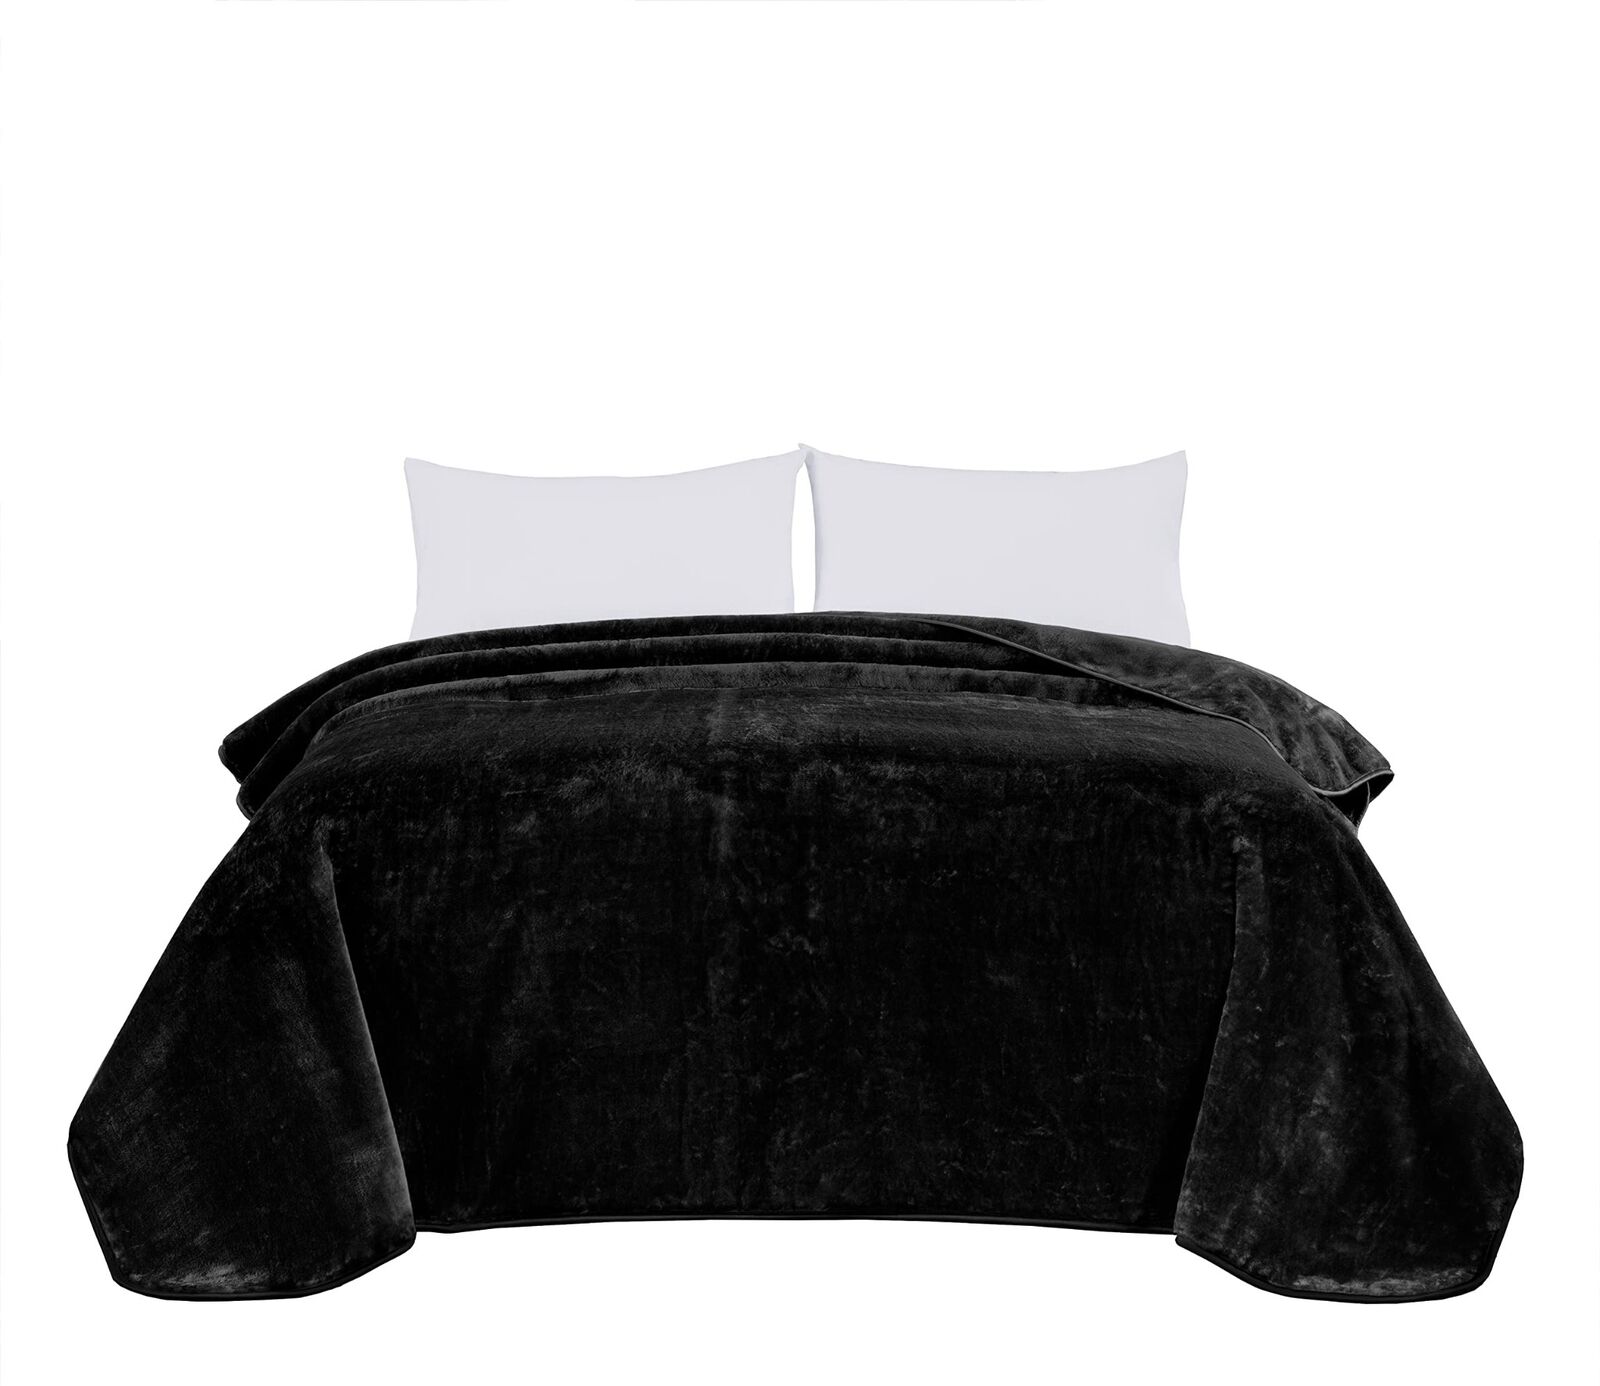 9 Pounds Heavy Thick Korean Mink Blanket 85 X 95 Inches- King (Oversized Queen)